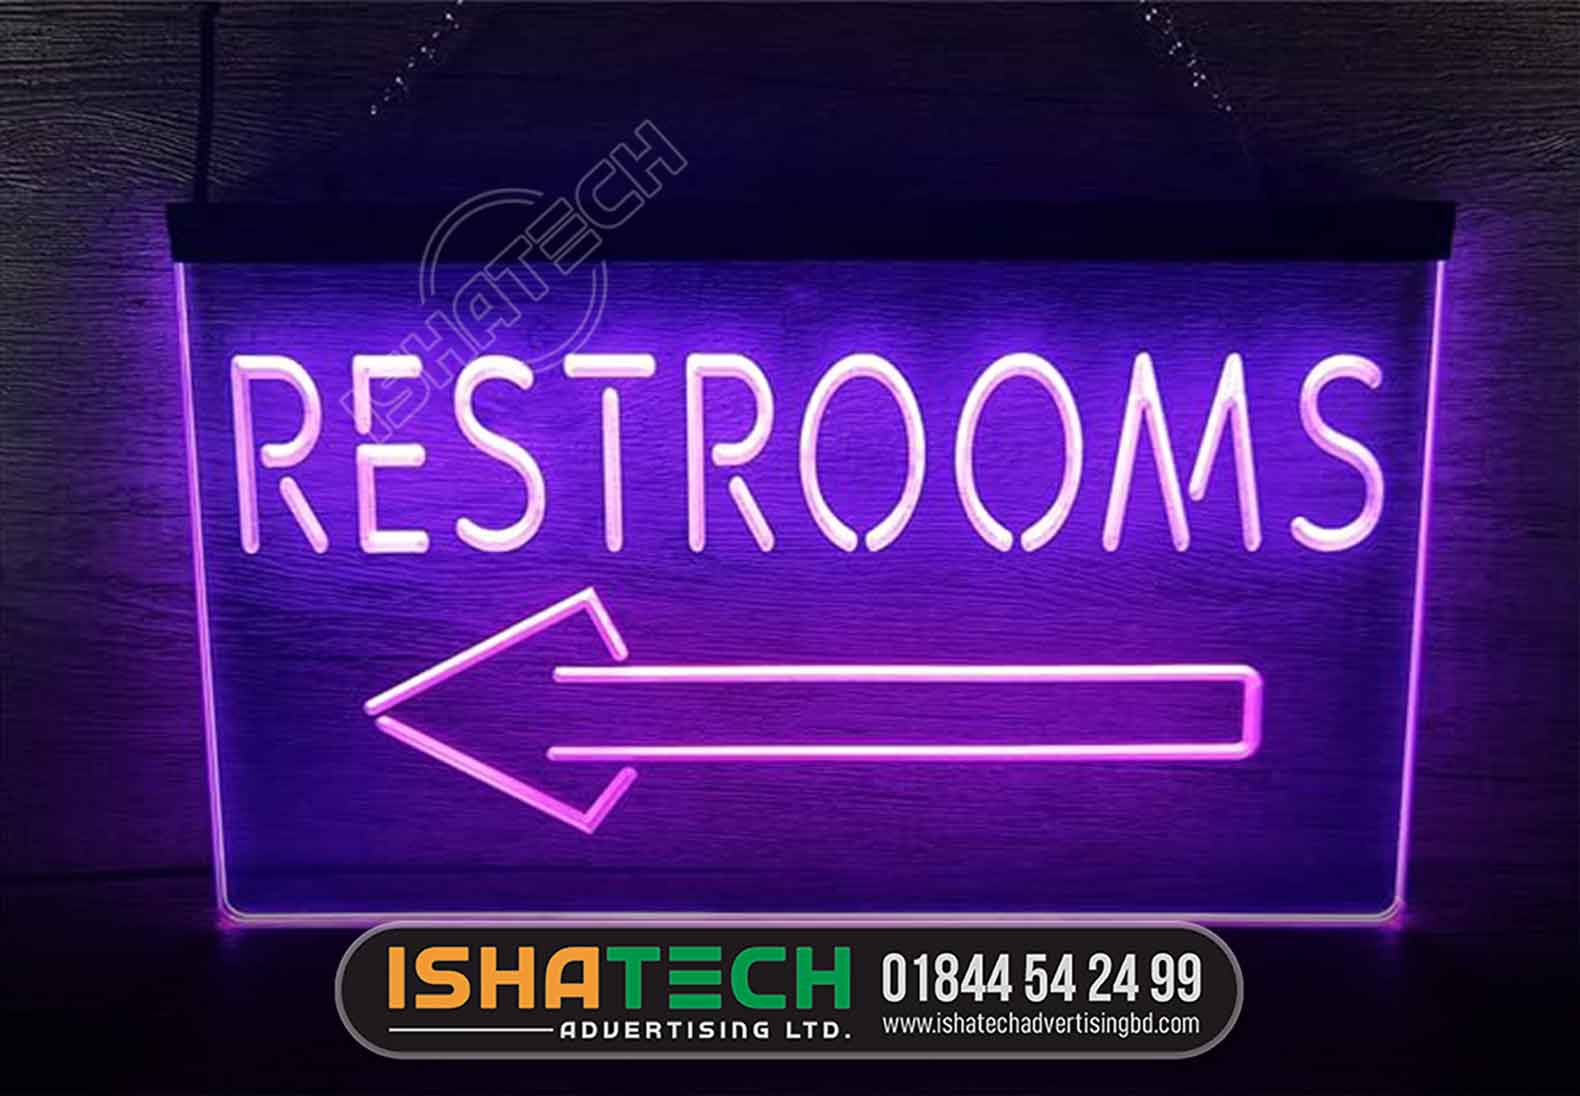 RESTROOM LED ACRYLIC LETTER SIGBOARD BY ISHATECH ADVERTISING LTD